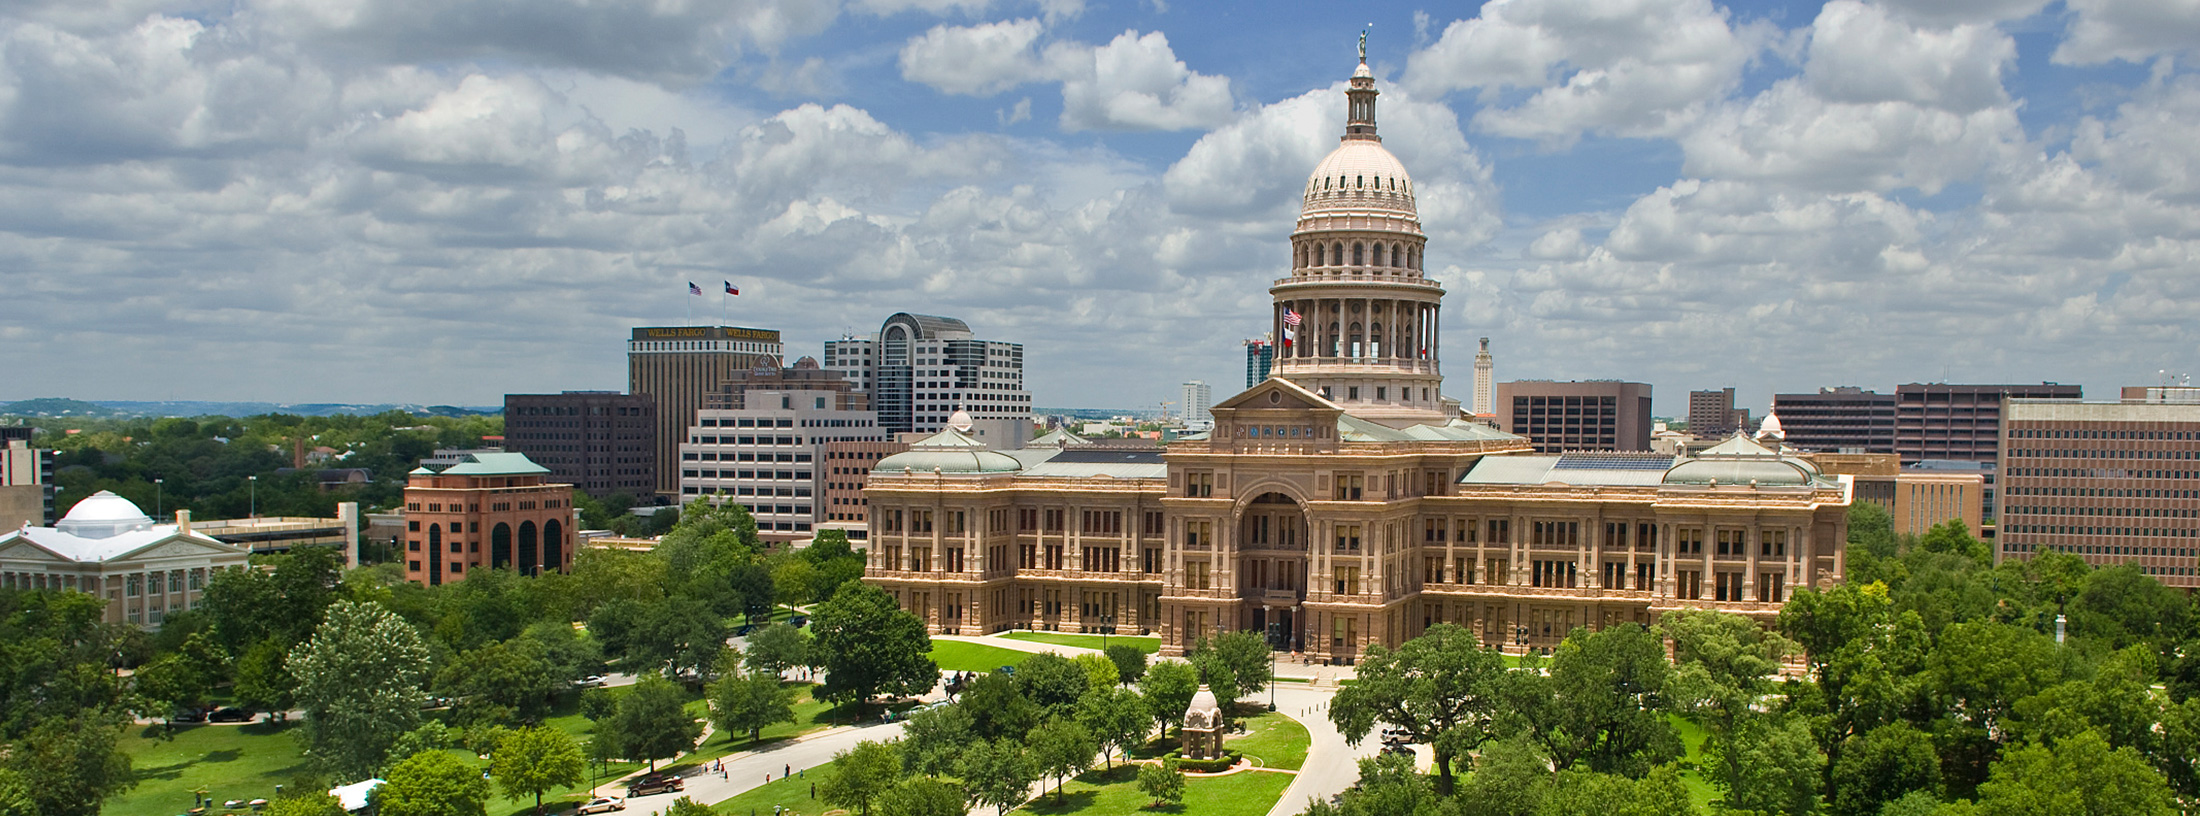 The Texas state capitol building in Austin